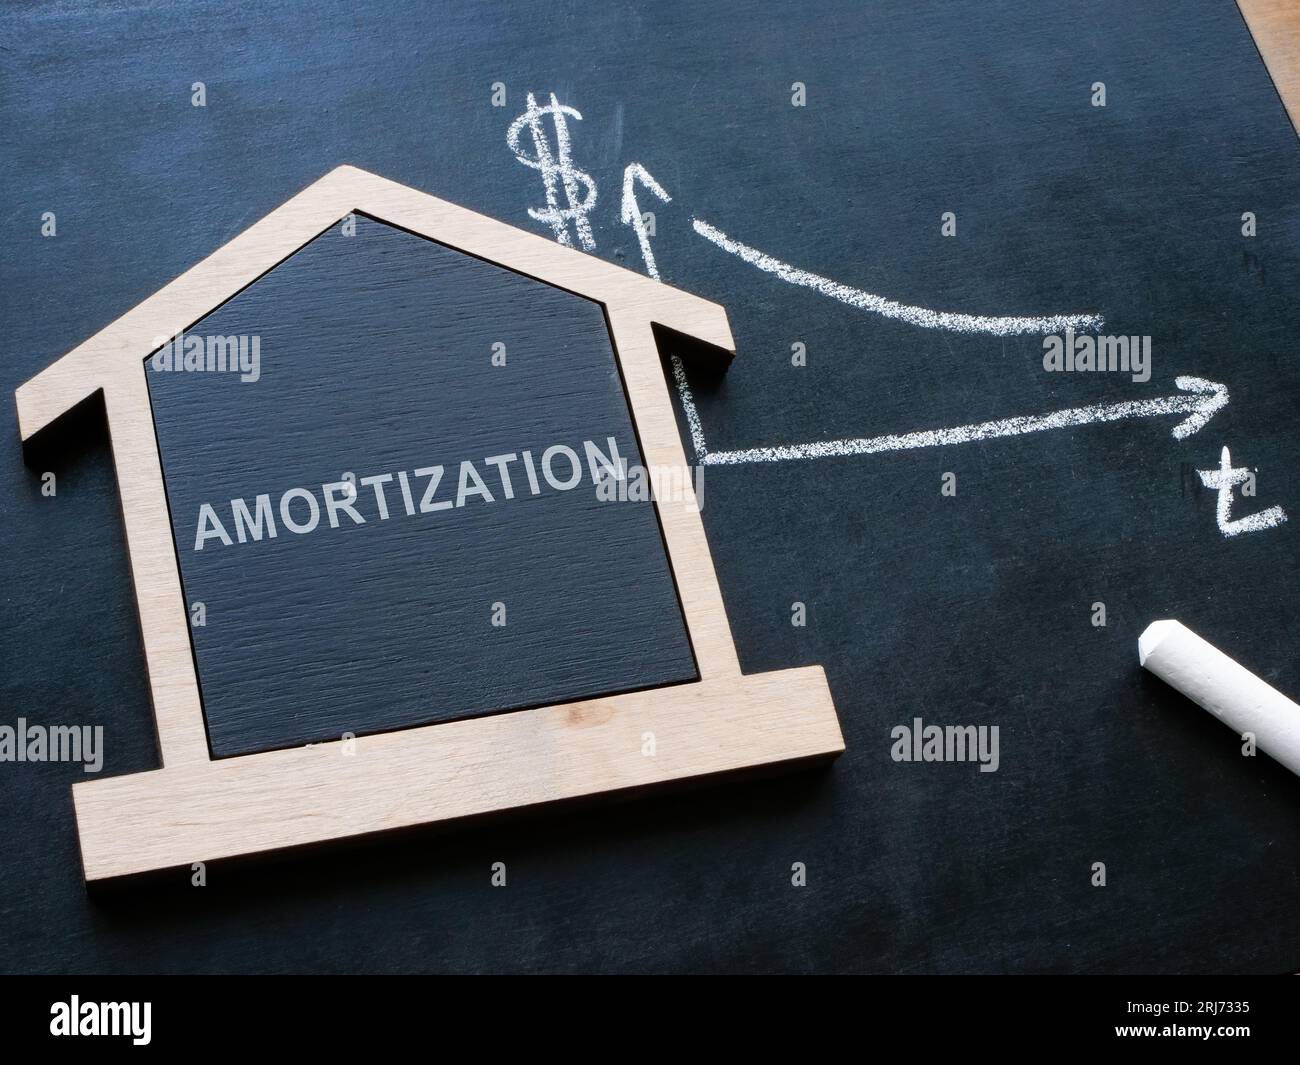 Wooden model of the house with inscription amortization and chart. Stock Photo